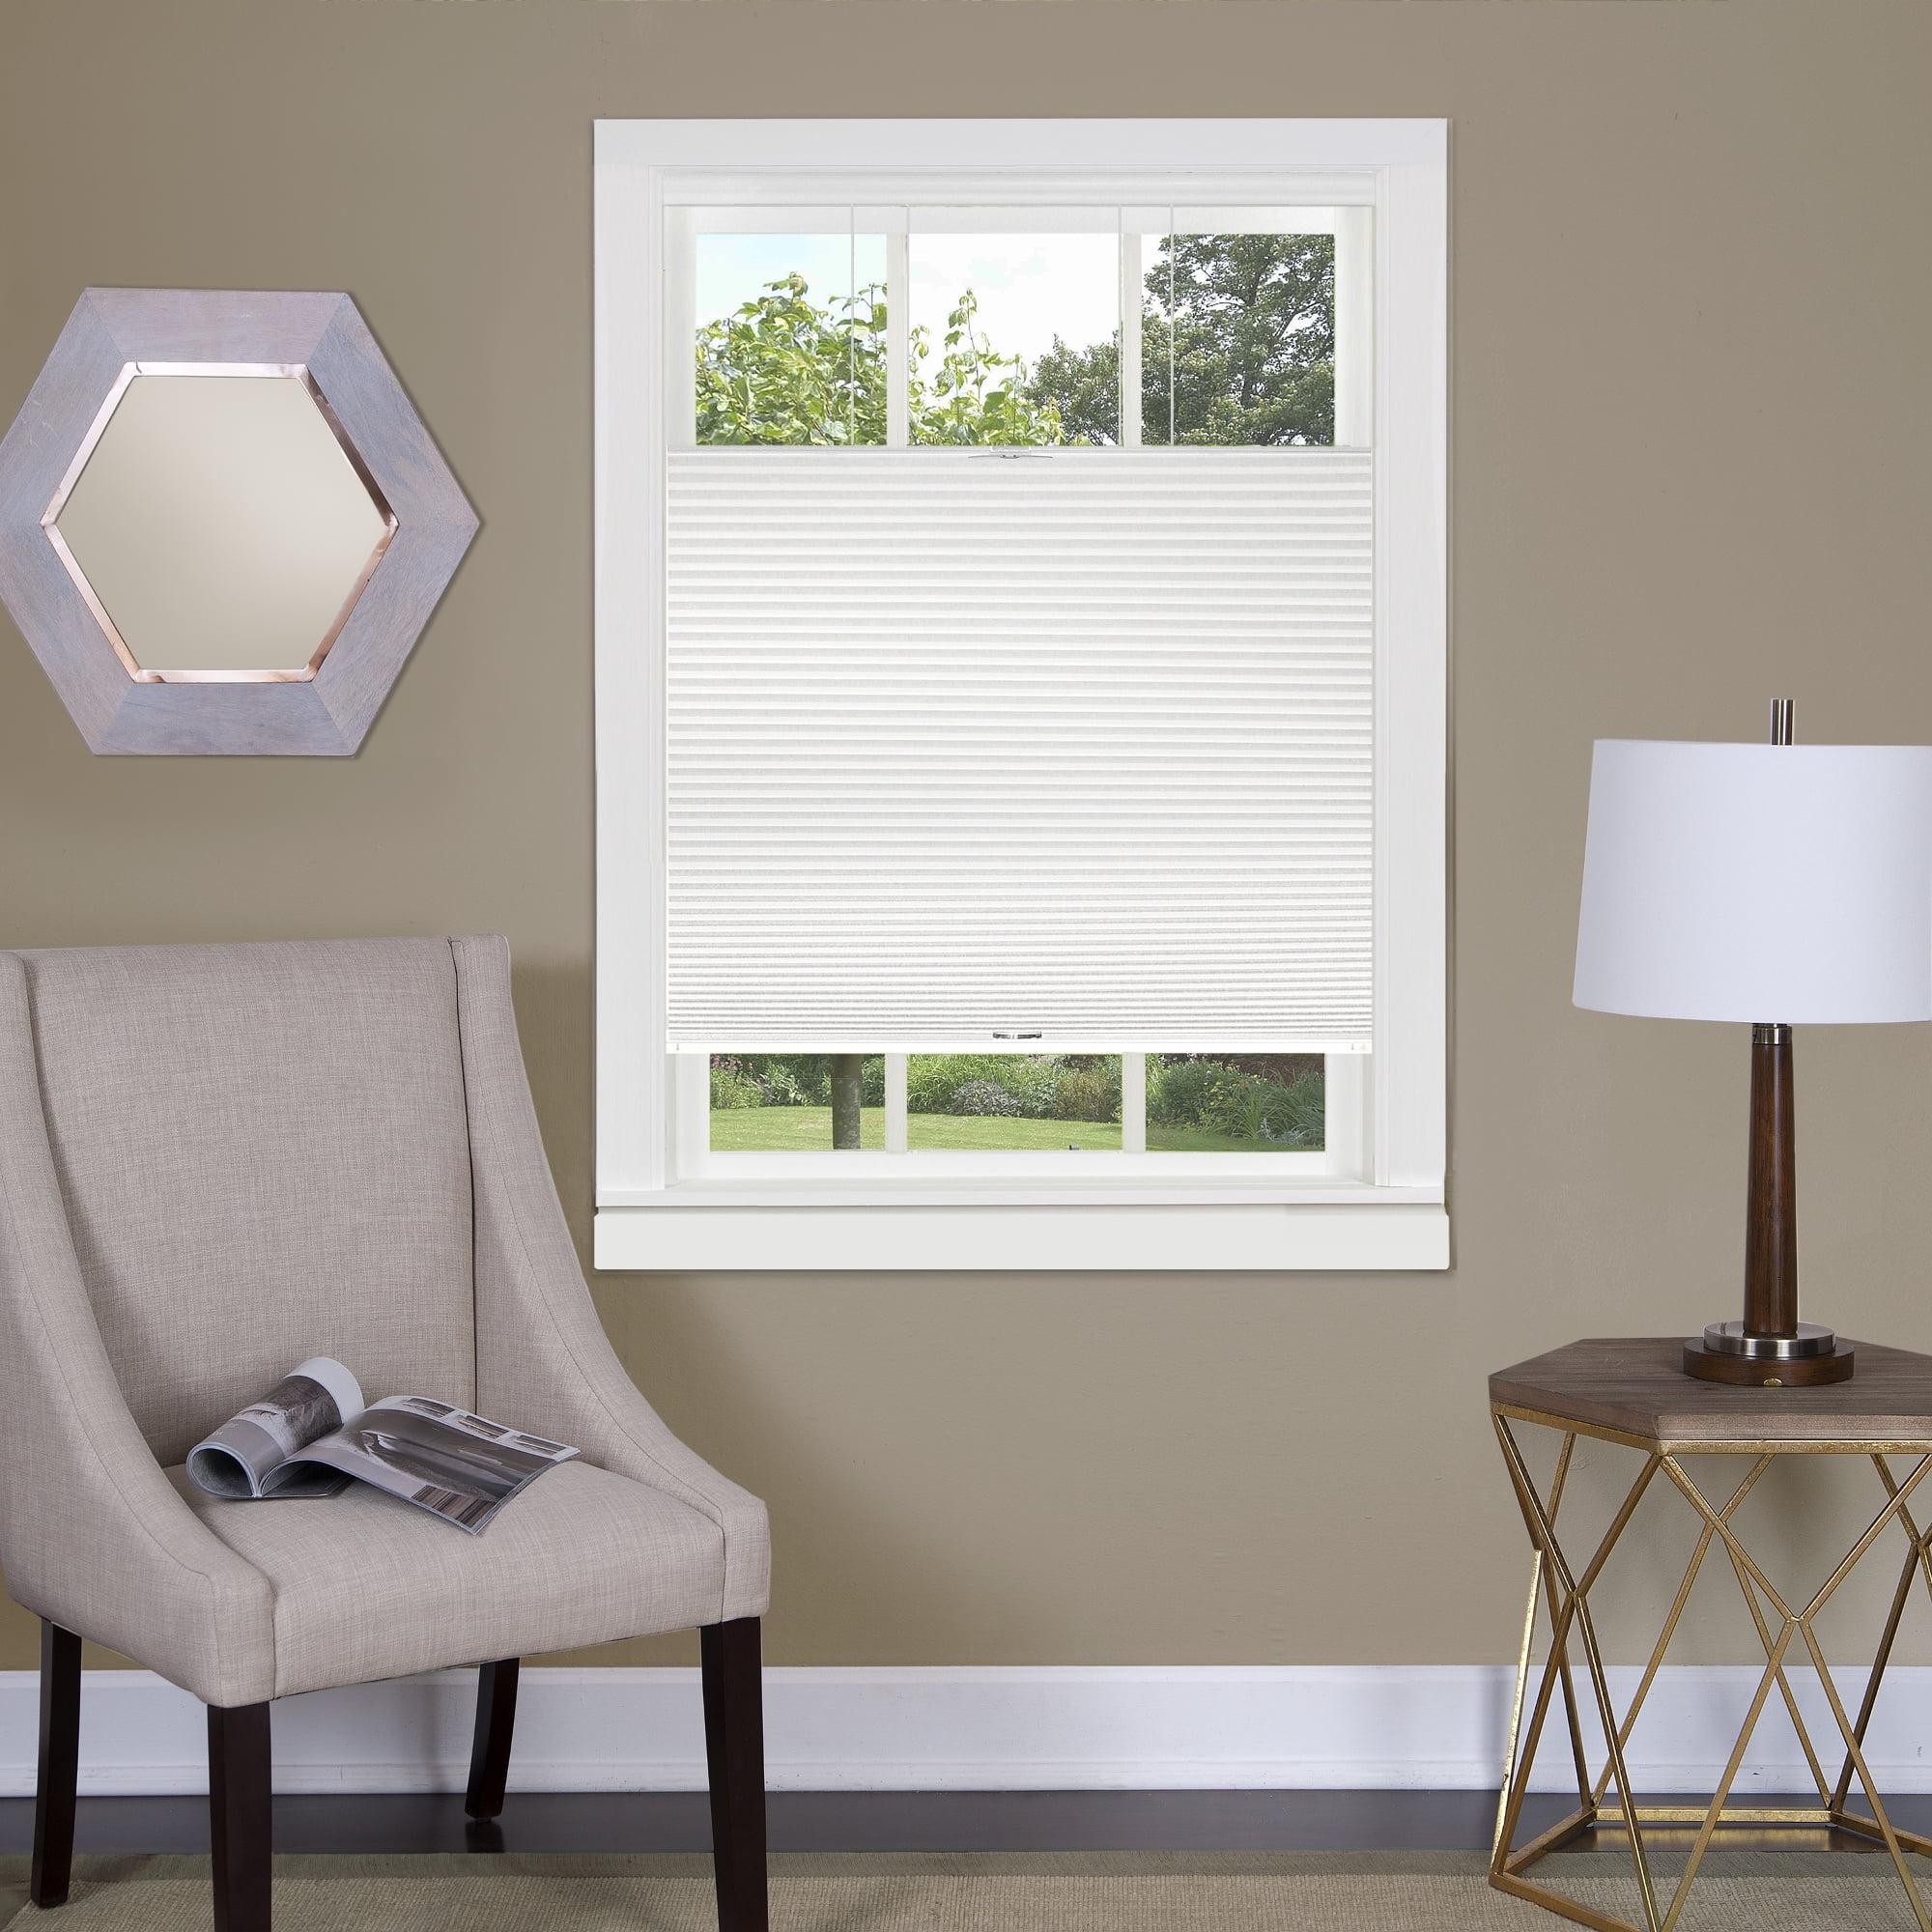 Bali Blinds Bottom-Up/Top-Down Cordless Cellular Shades Window Covering Wheat Linen 29x48